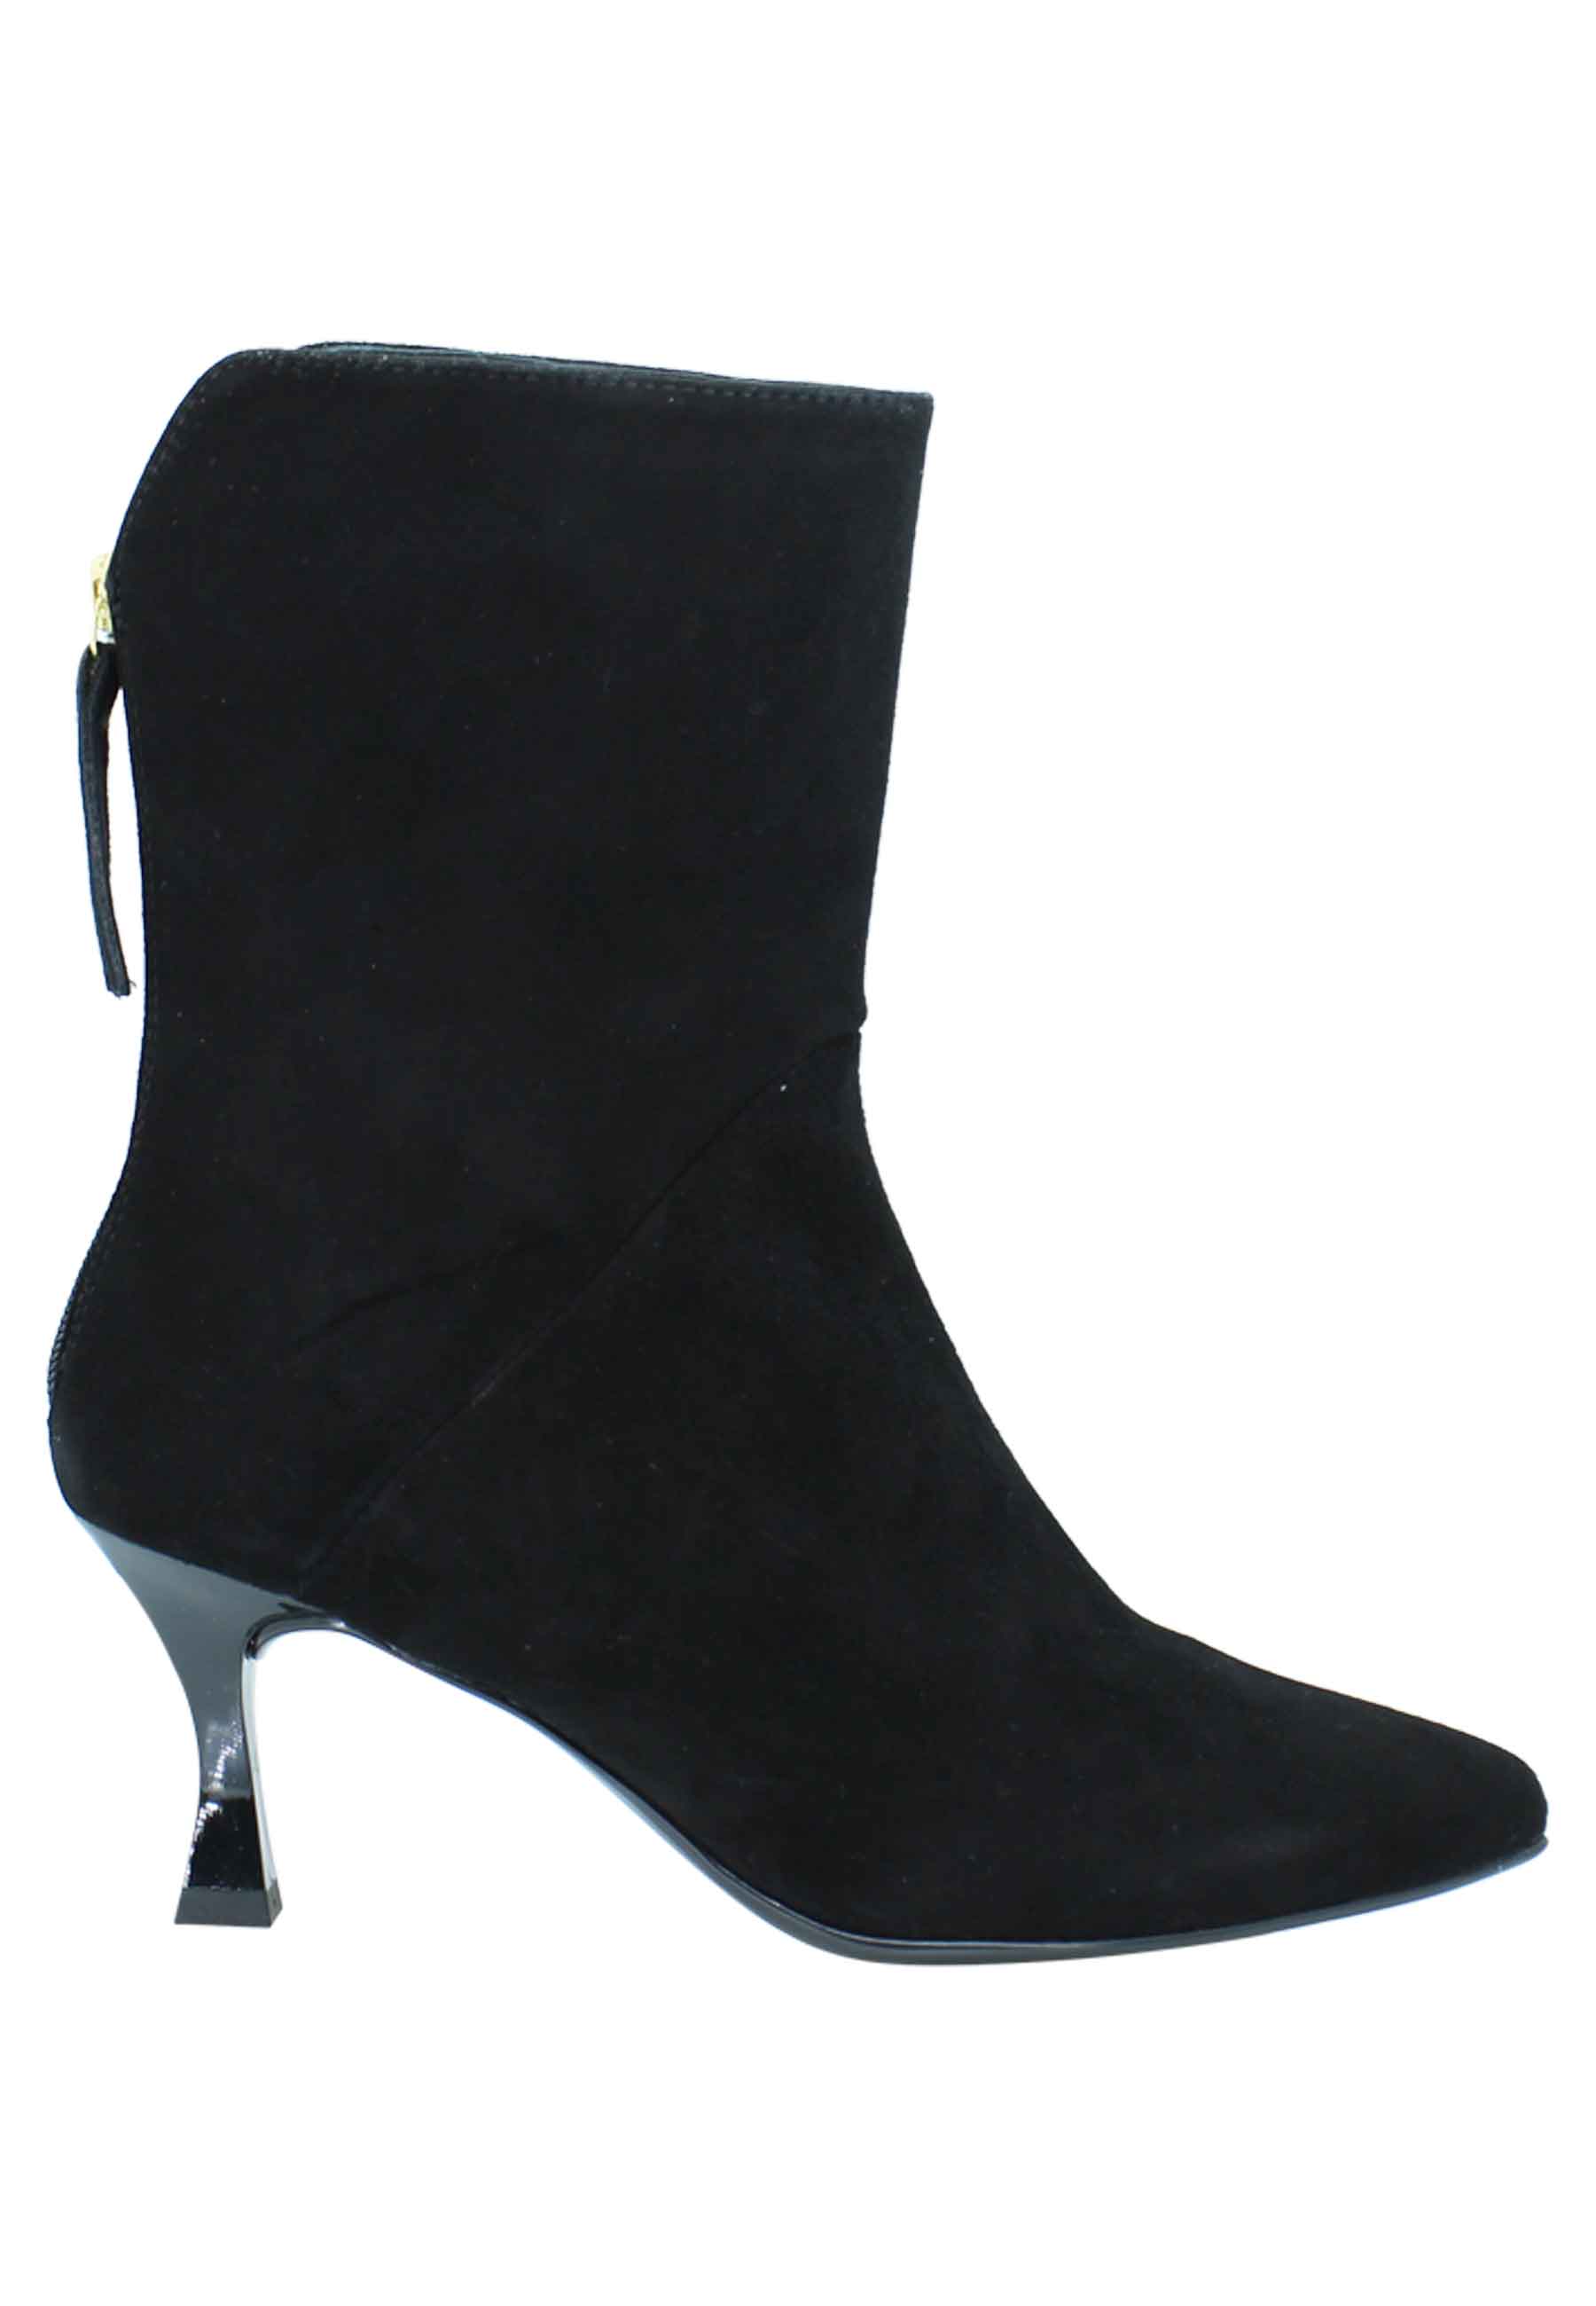 Women's ankle boots in black suede with back zip, pointed toe and shiny heel